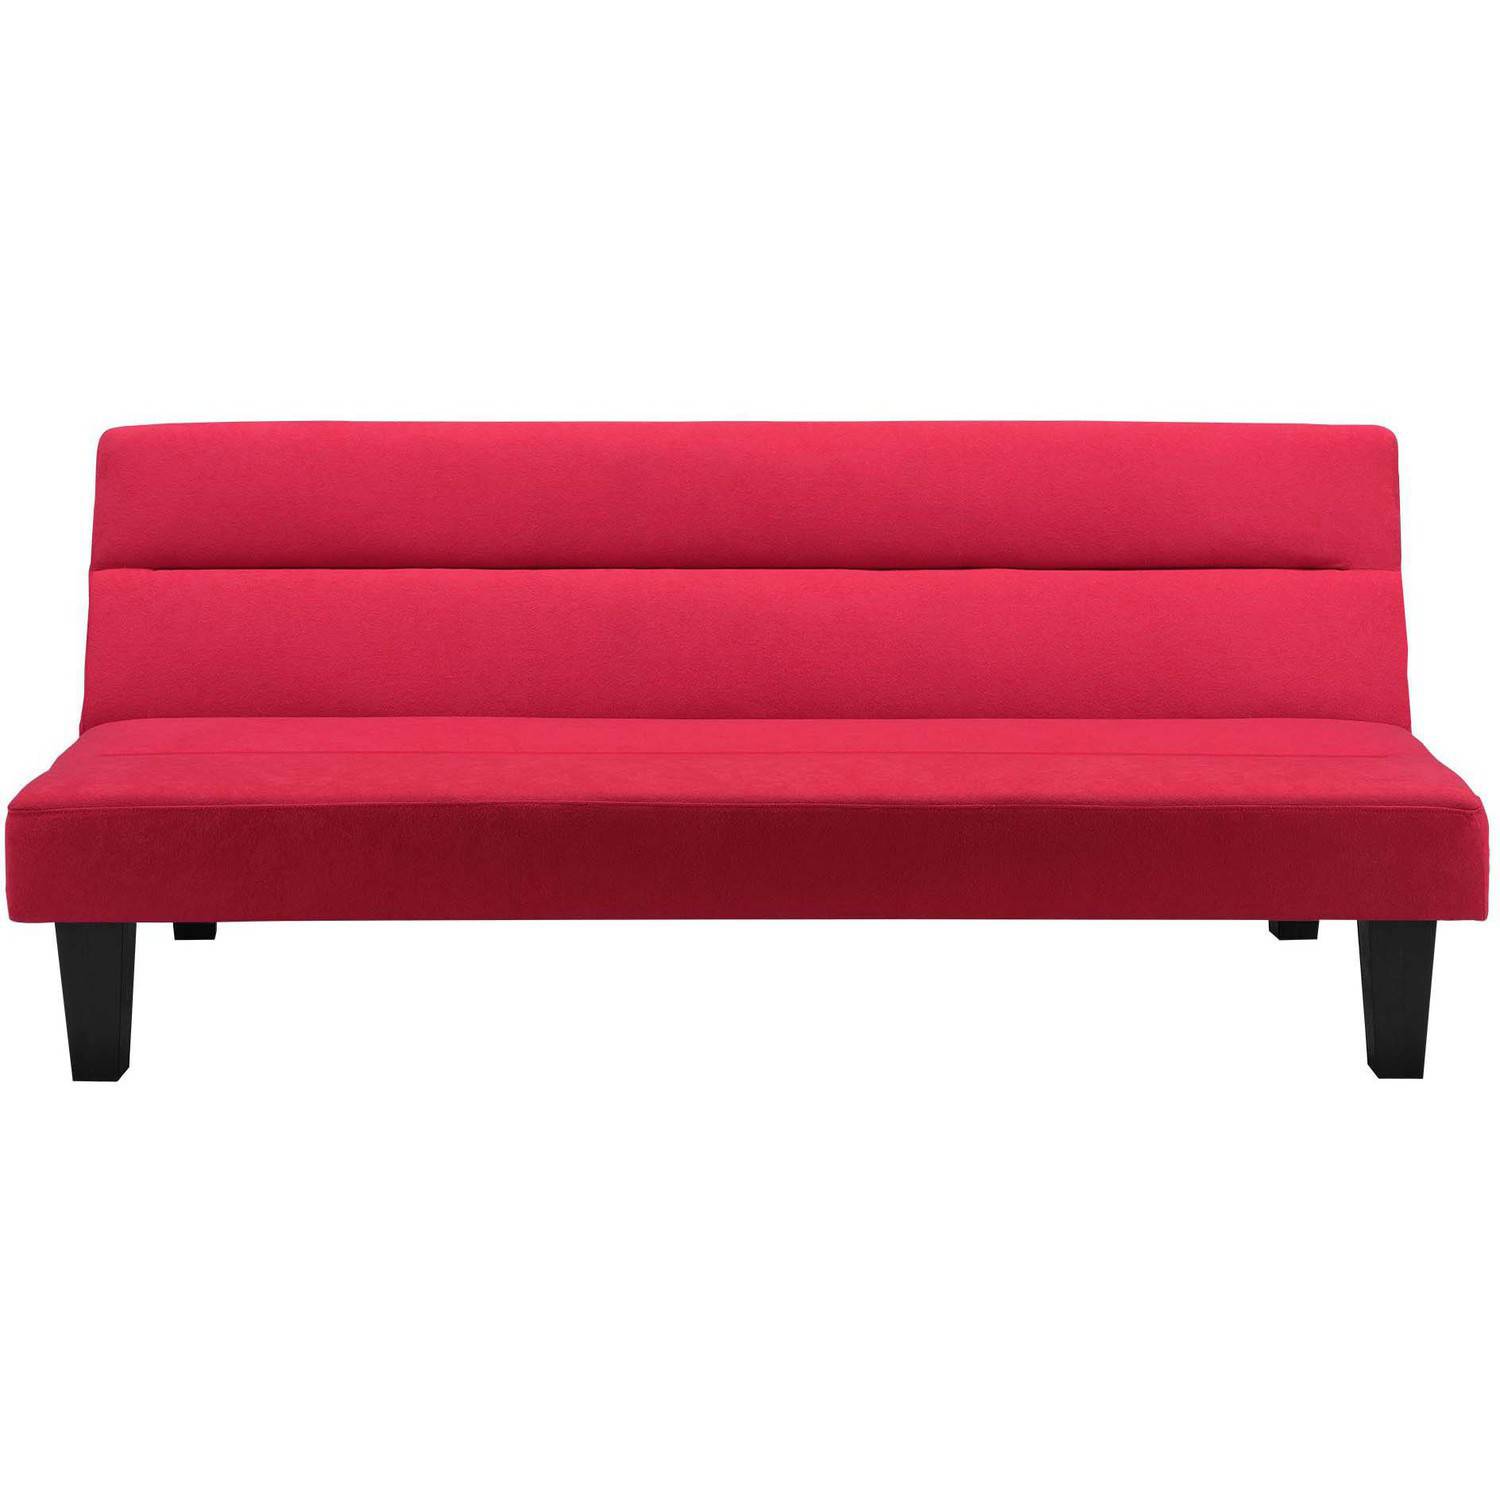 DHP Kebo Futon with Microfiber Cover, Red - image 4 of 13